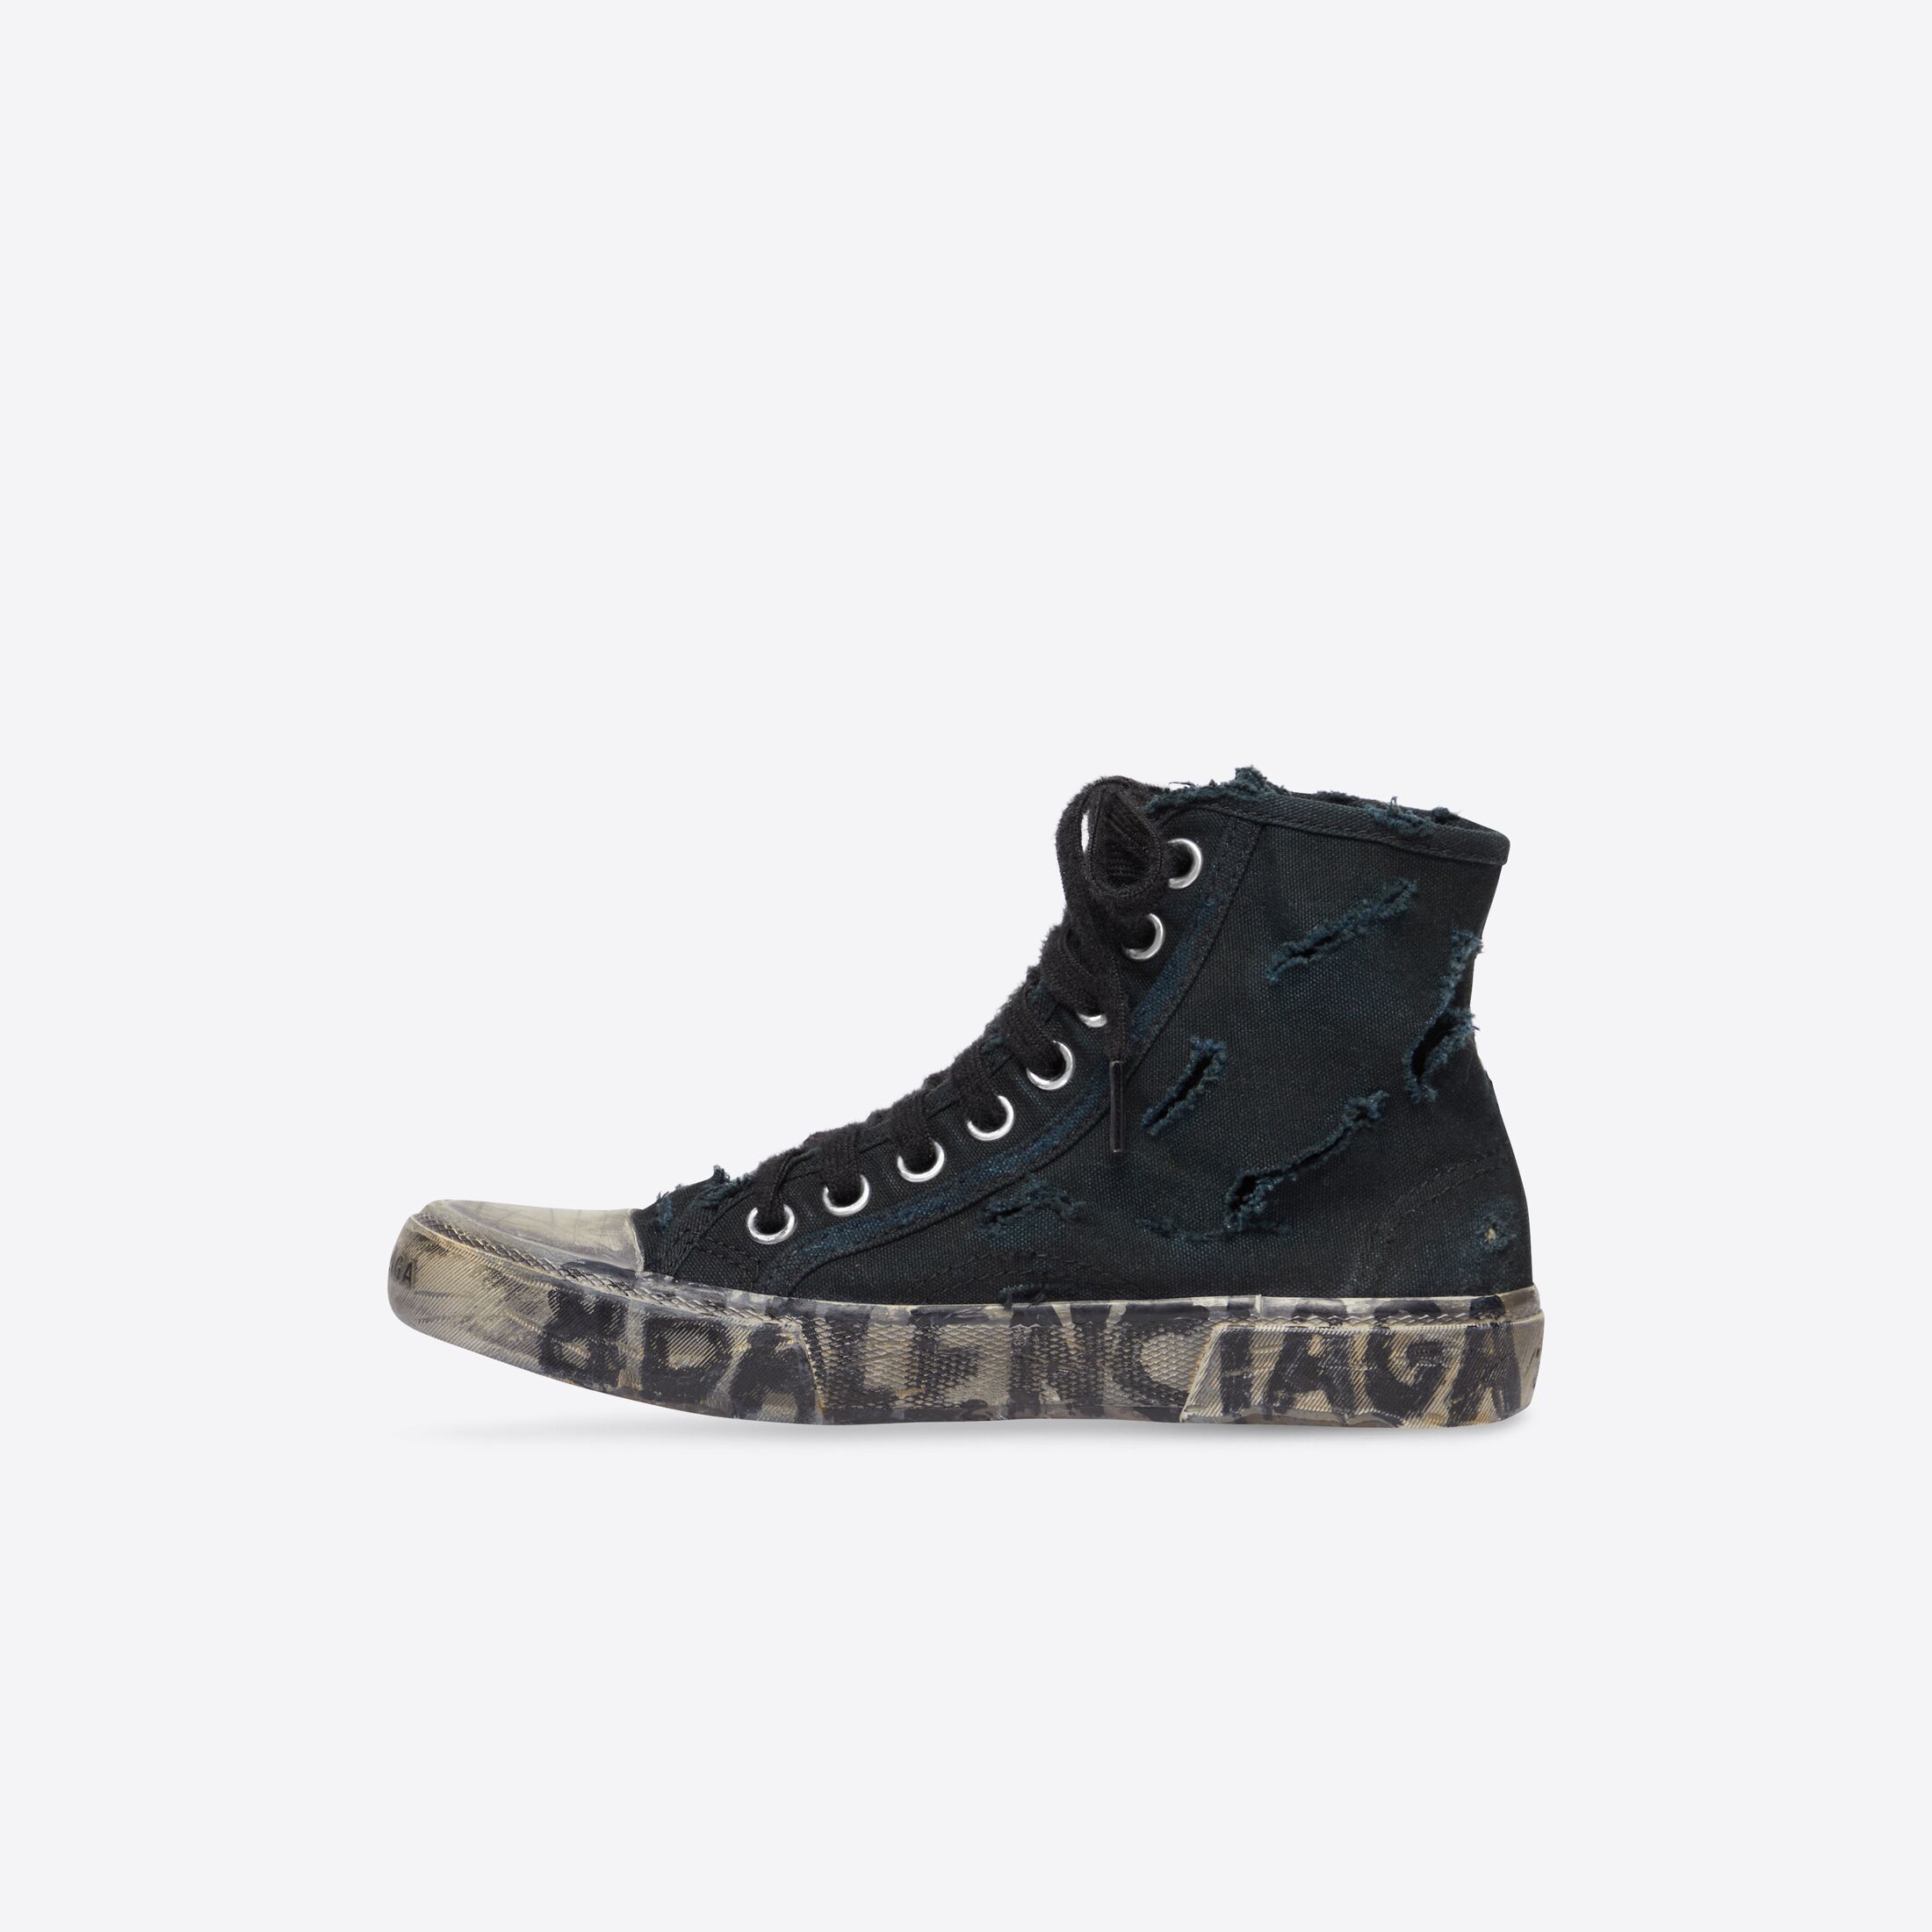 Balenciaga is These Sneakers For HKD